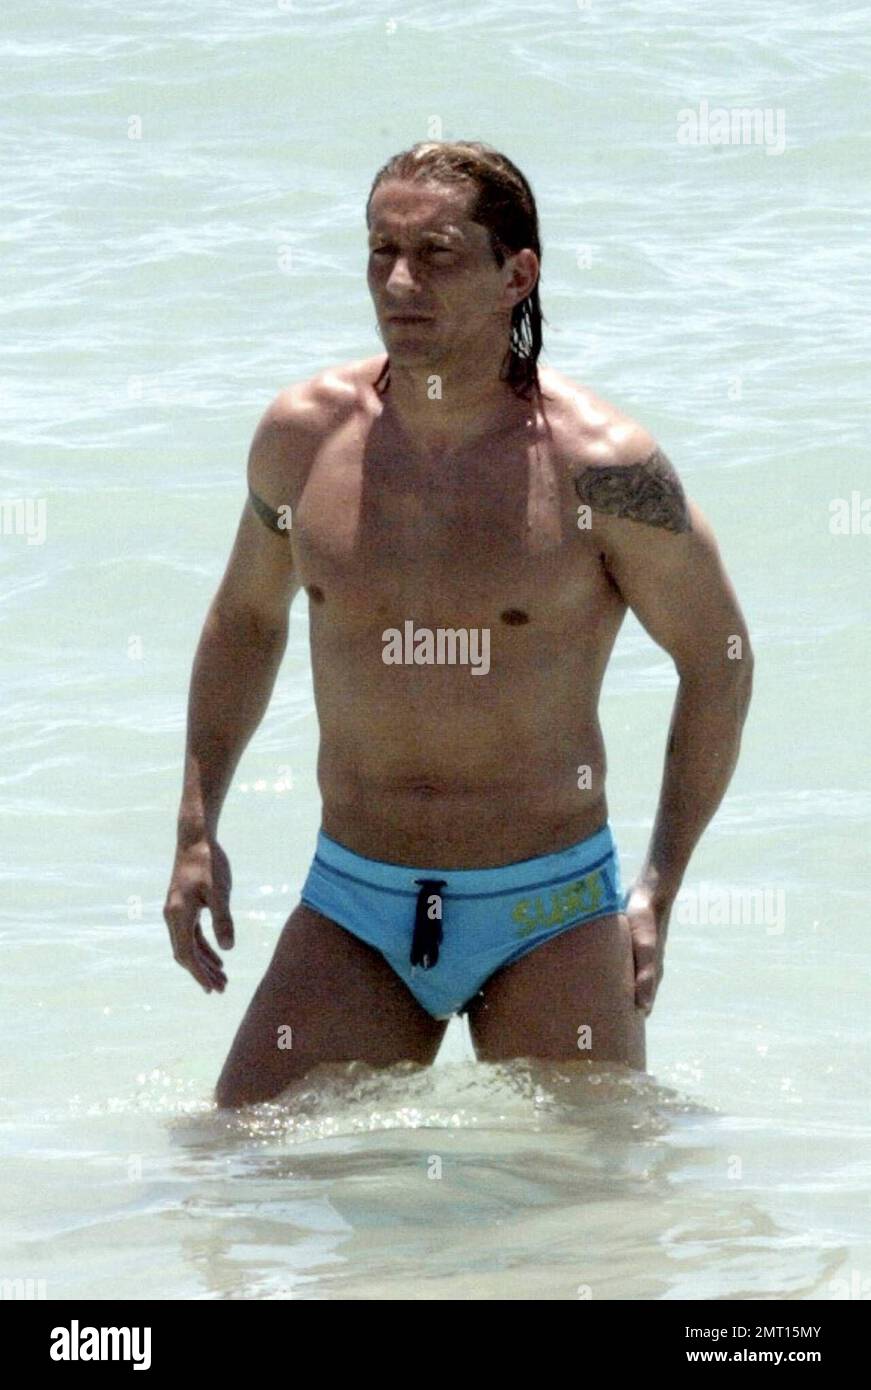 Real Madrid football star Michel Salgado enjoys a second day with family and friends in the ocean on Miami Beach. Miami, FL 5/31/08 Stock Photo